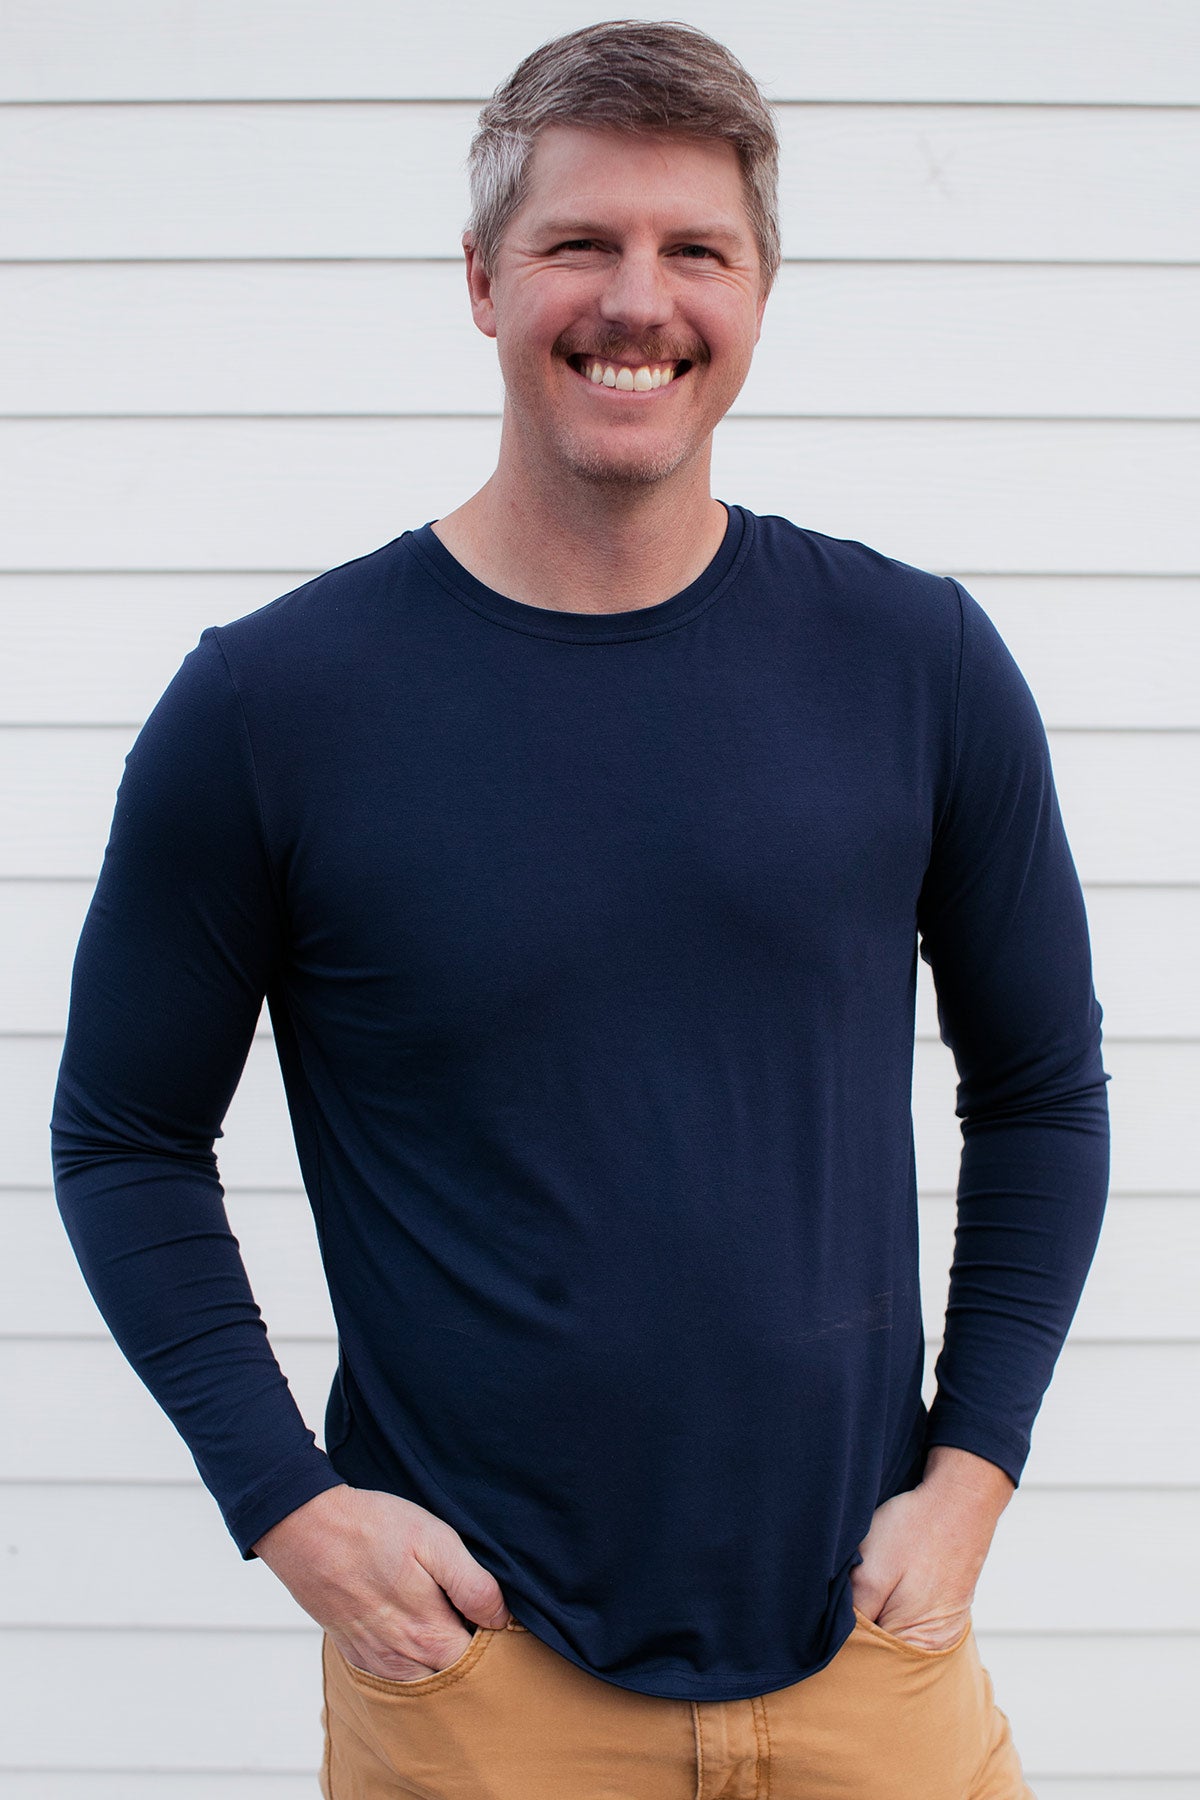 A man standing and smiling with both hands in his pockets, wearing Yala Jonah Men's Long Sleeve Bamboo Crew Tee Shirt in Navy